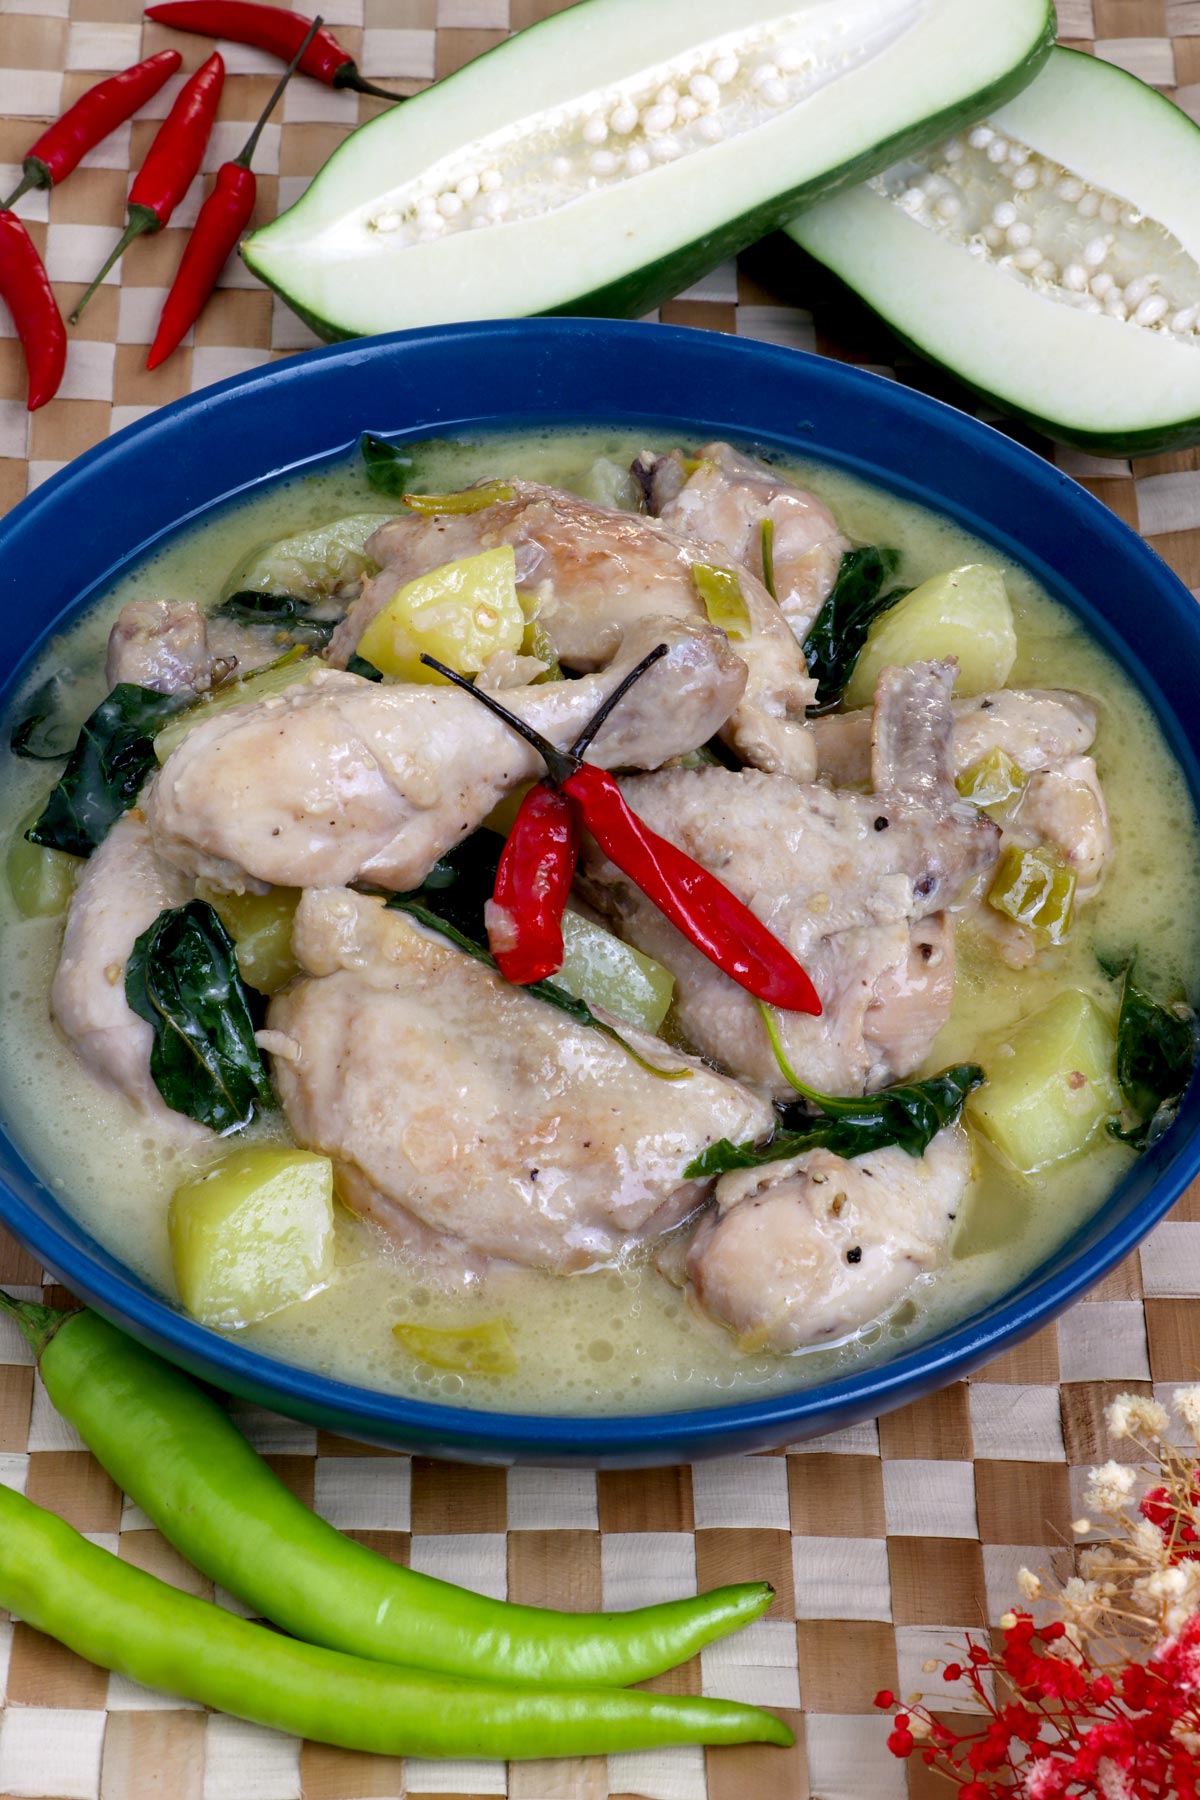 Chicken Halang halang in a serving bowl with chunks of tender green papaya and chili leaves in a creamy soup.